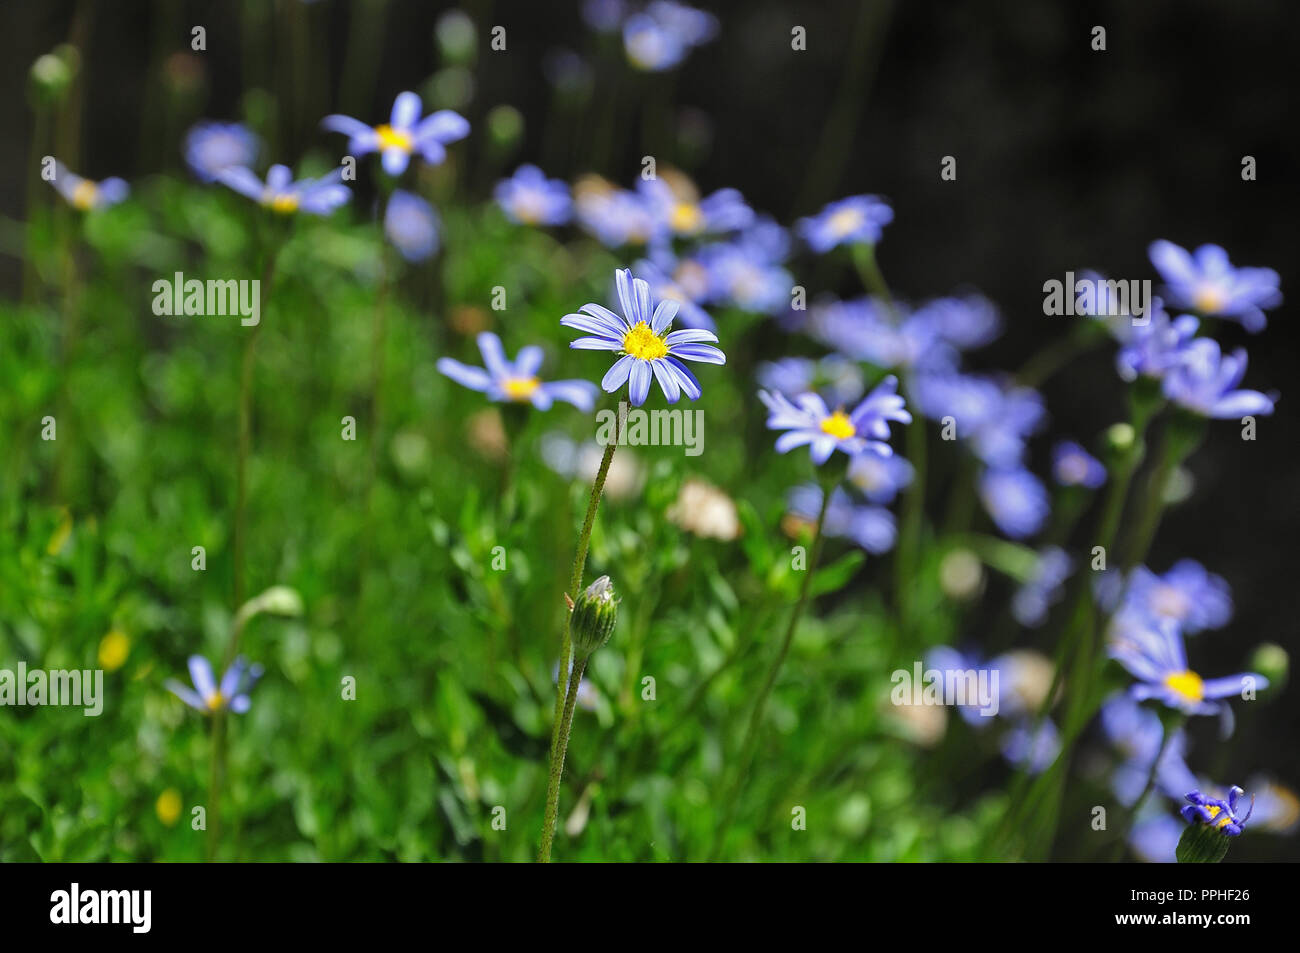 close-up of aster flower with blue florets in a flower box Stock Photo